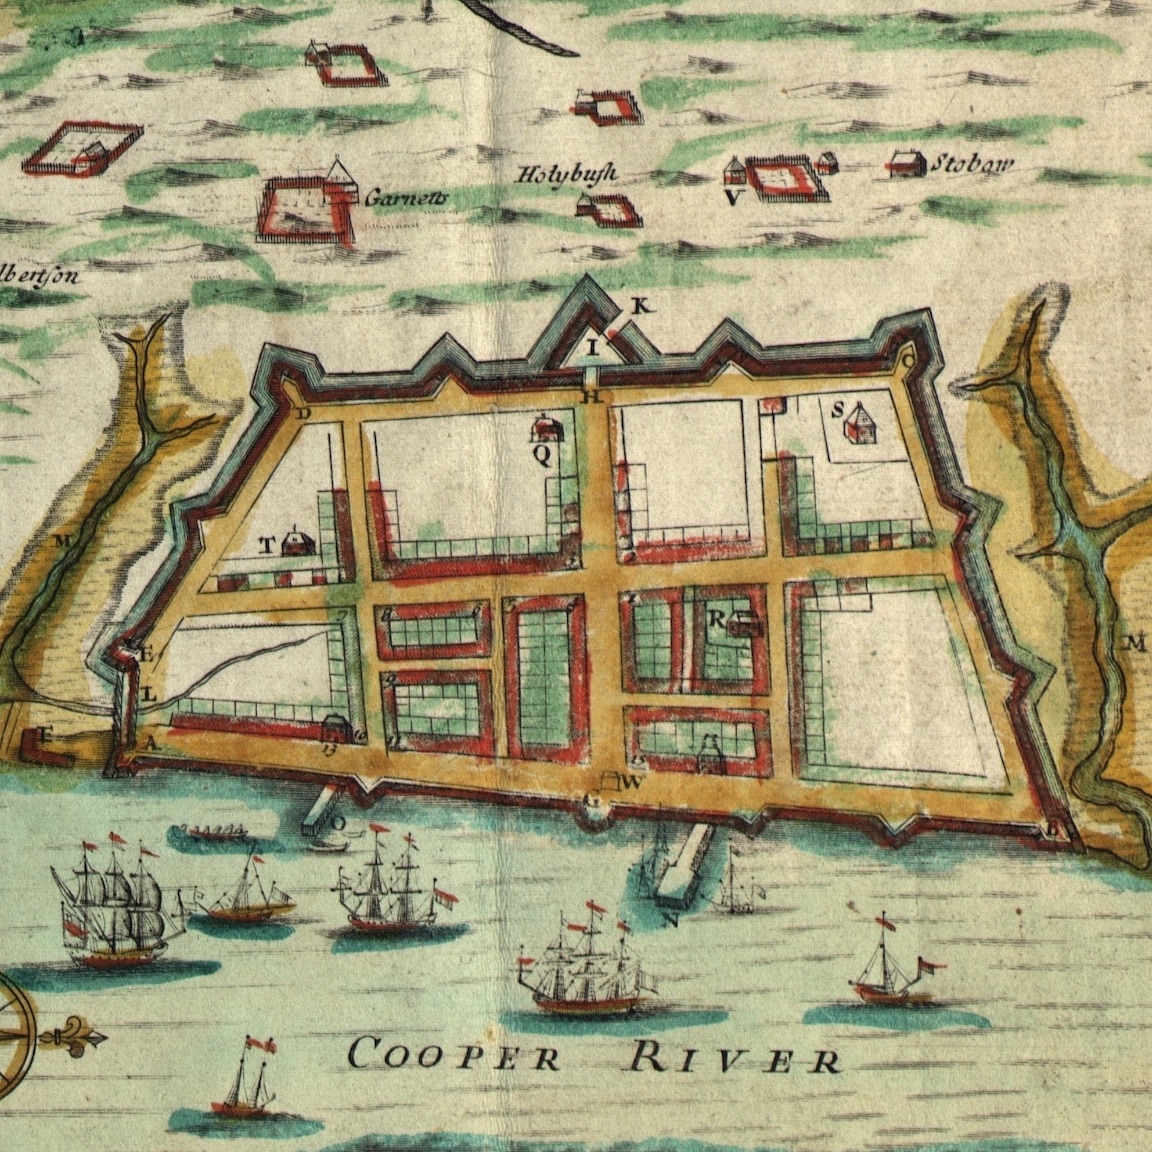 Creating a Walled City: The Charleston Enceinte of 1704